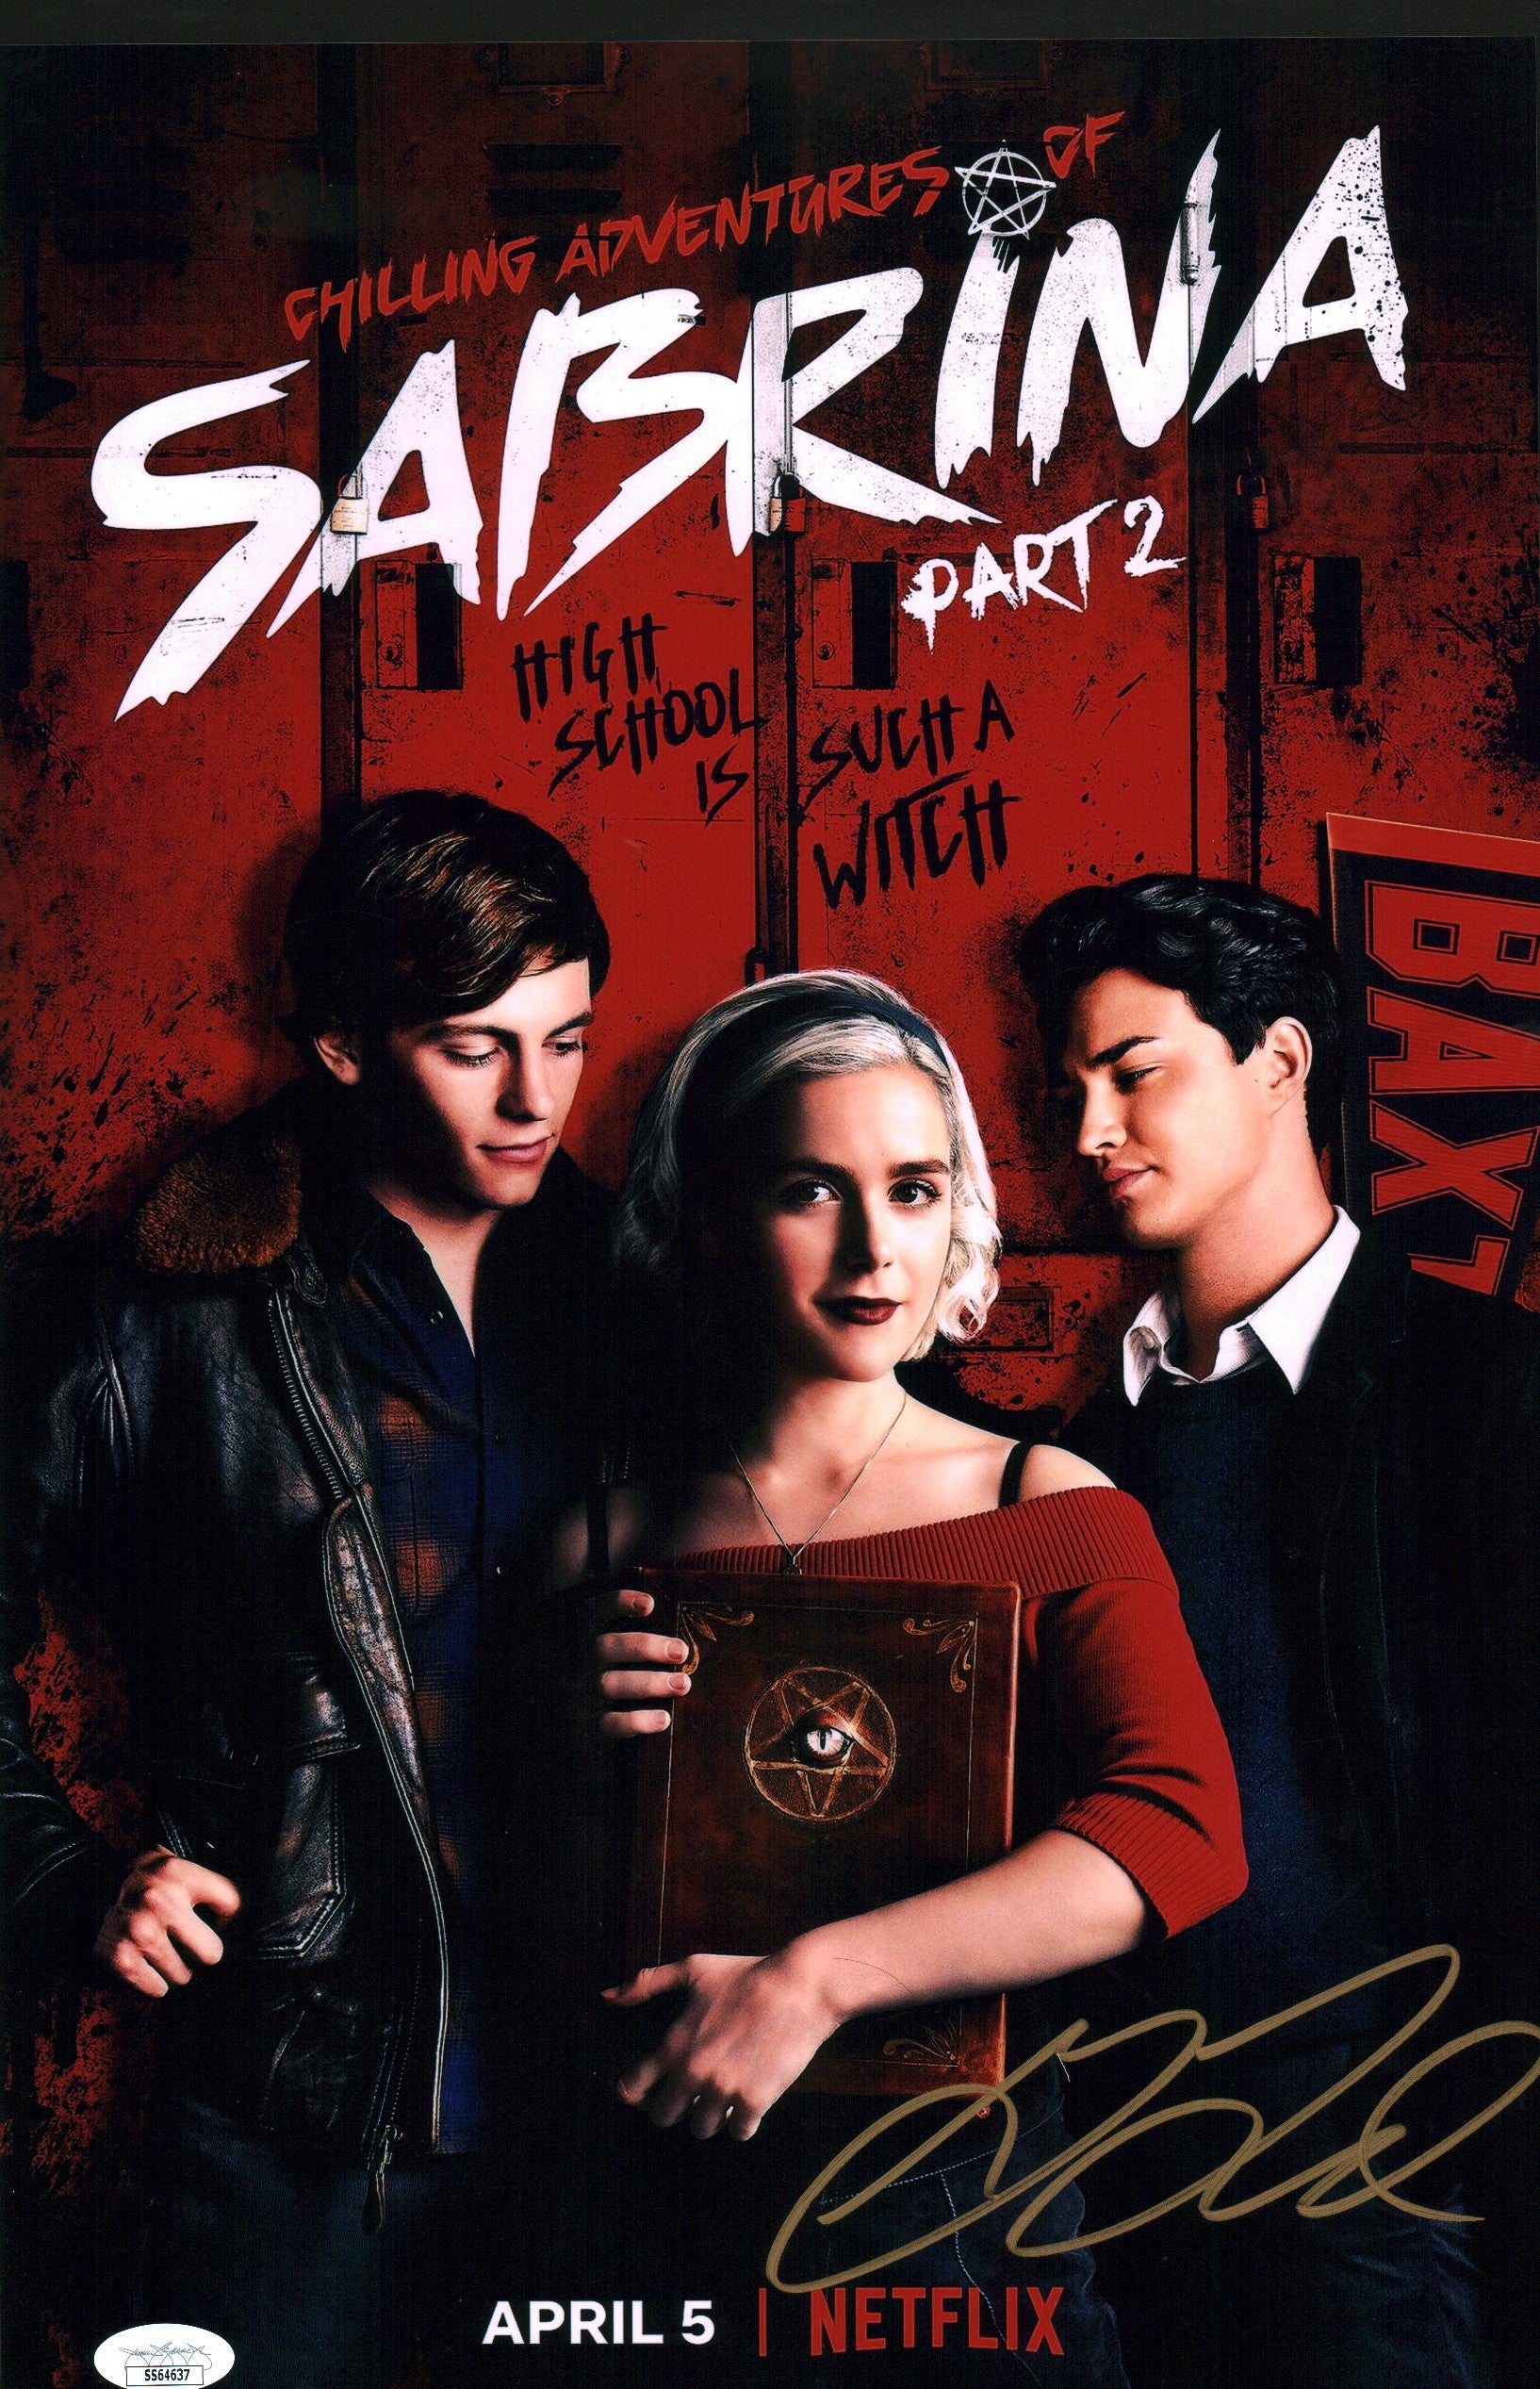 Gavin Leatherwood Chilling Adventures of Sabrina 11x17 Signed Mini Poster JSA Certified Autograph